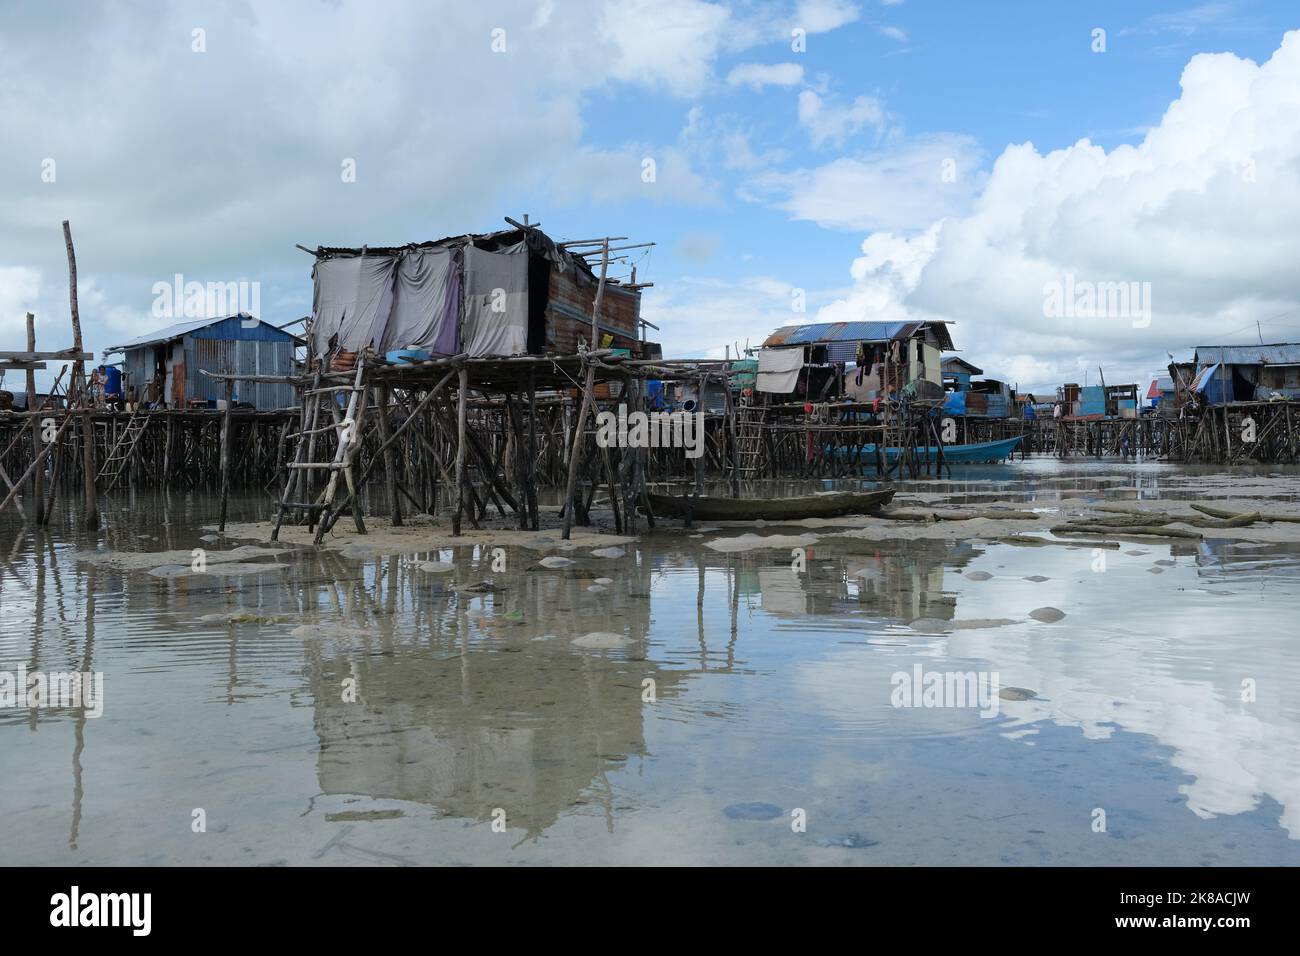 Omadal Island is a Malaysian island located in the Celebes Sea on the state of Sabah. The bajau laut village community during low tide time. Stock Photo